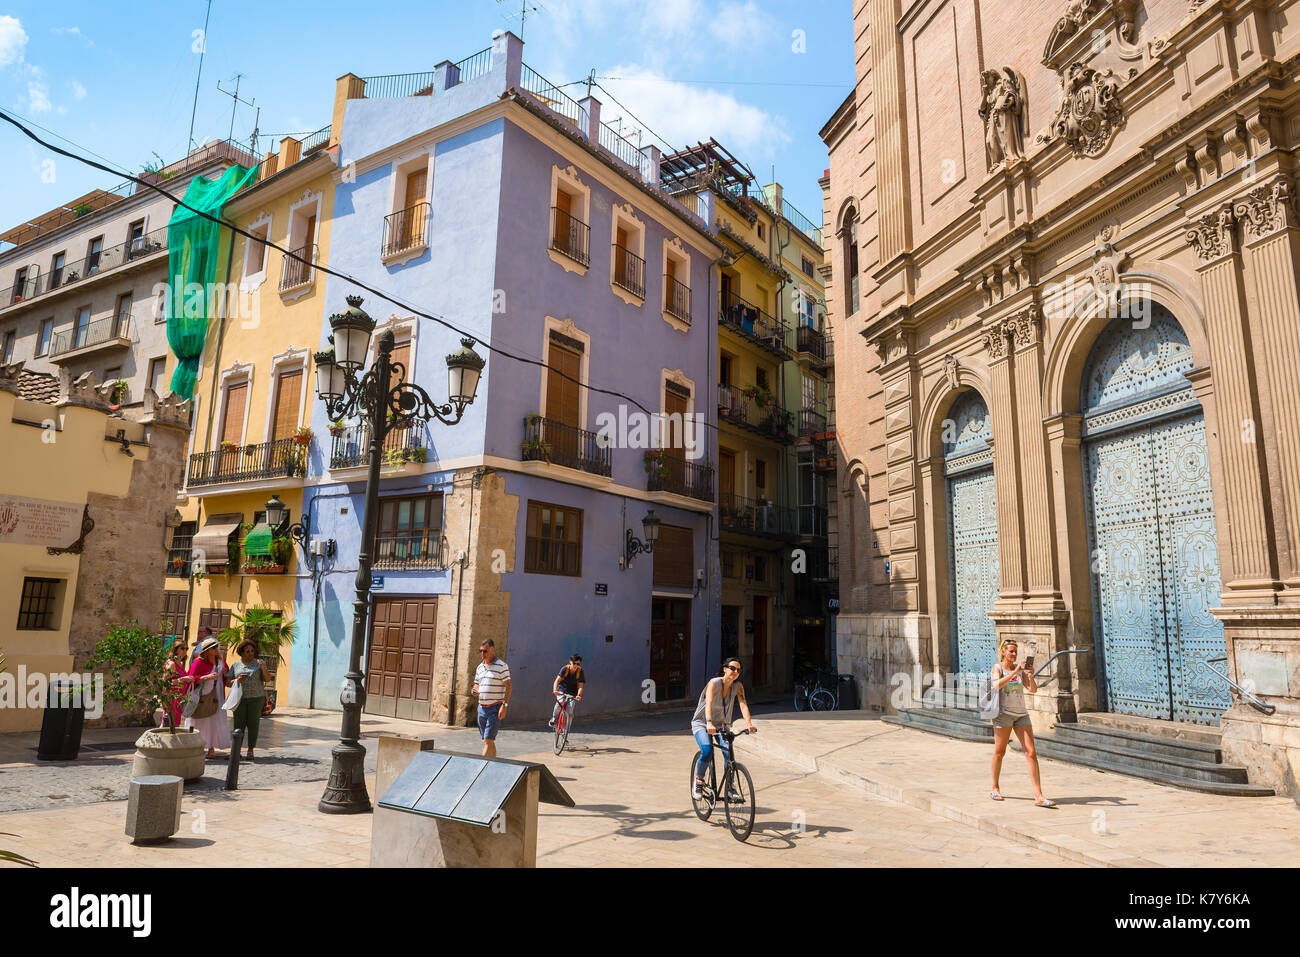 Old town Valencia Spain, view of the Plaza de la Companyia and Jesuit church in the heart of the historic old town quarter in Valencia, Spain. Stock Photo